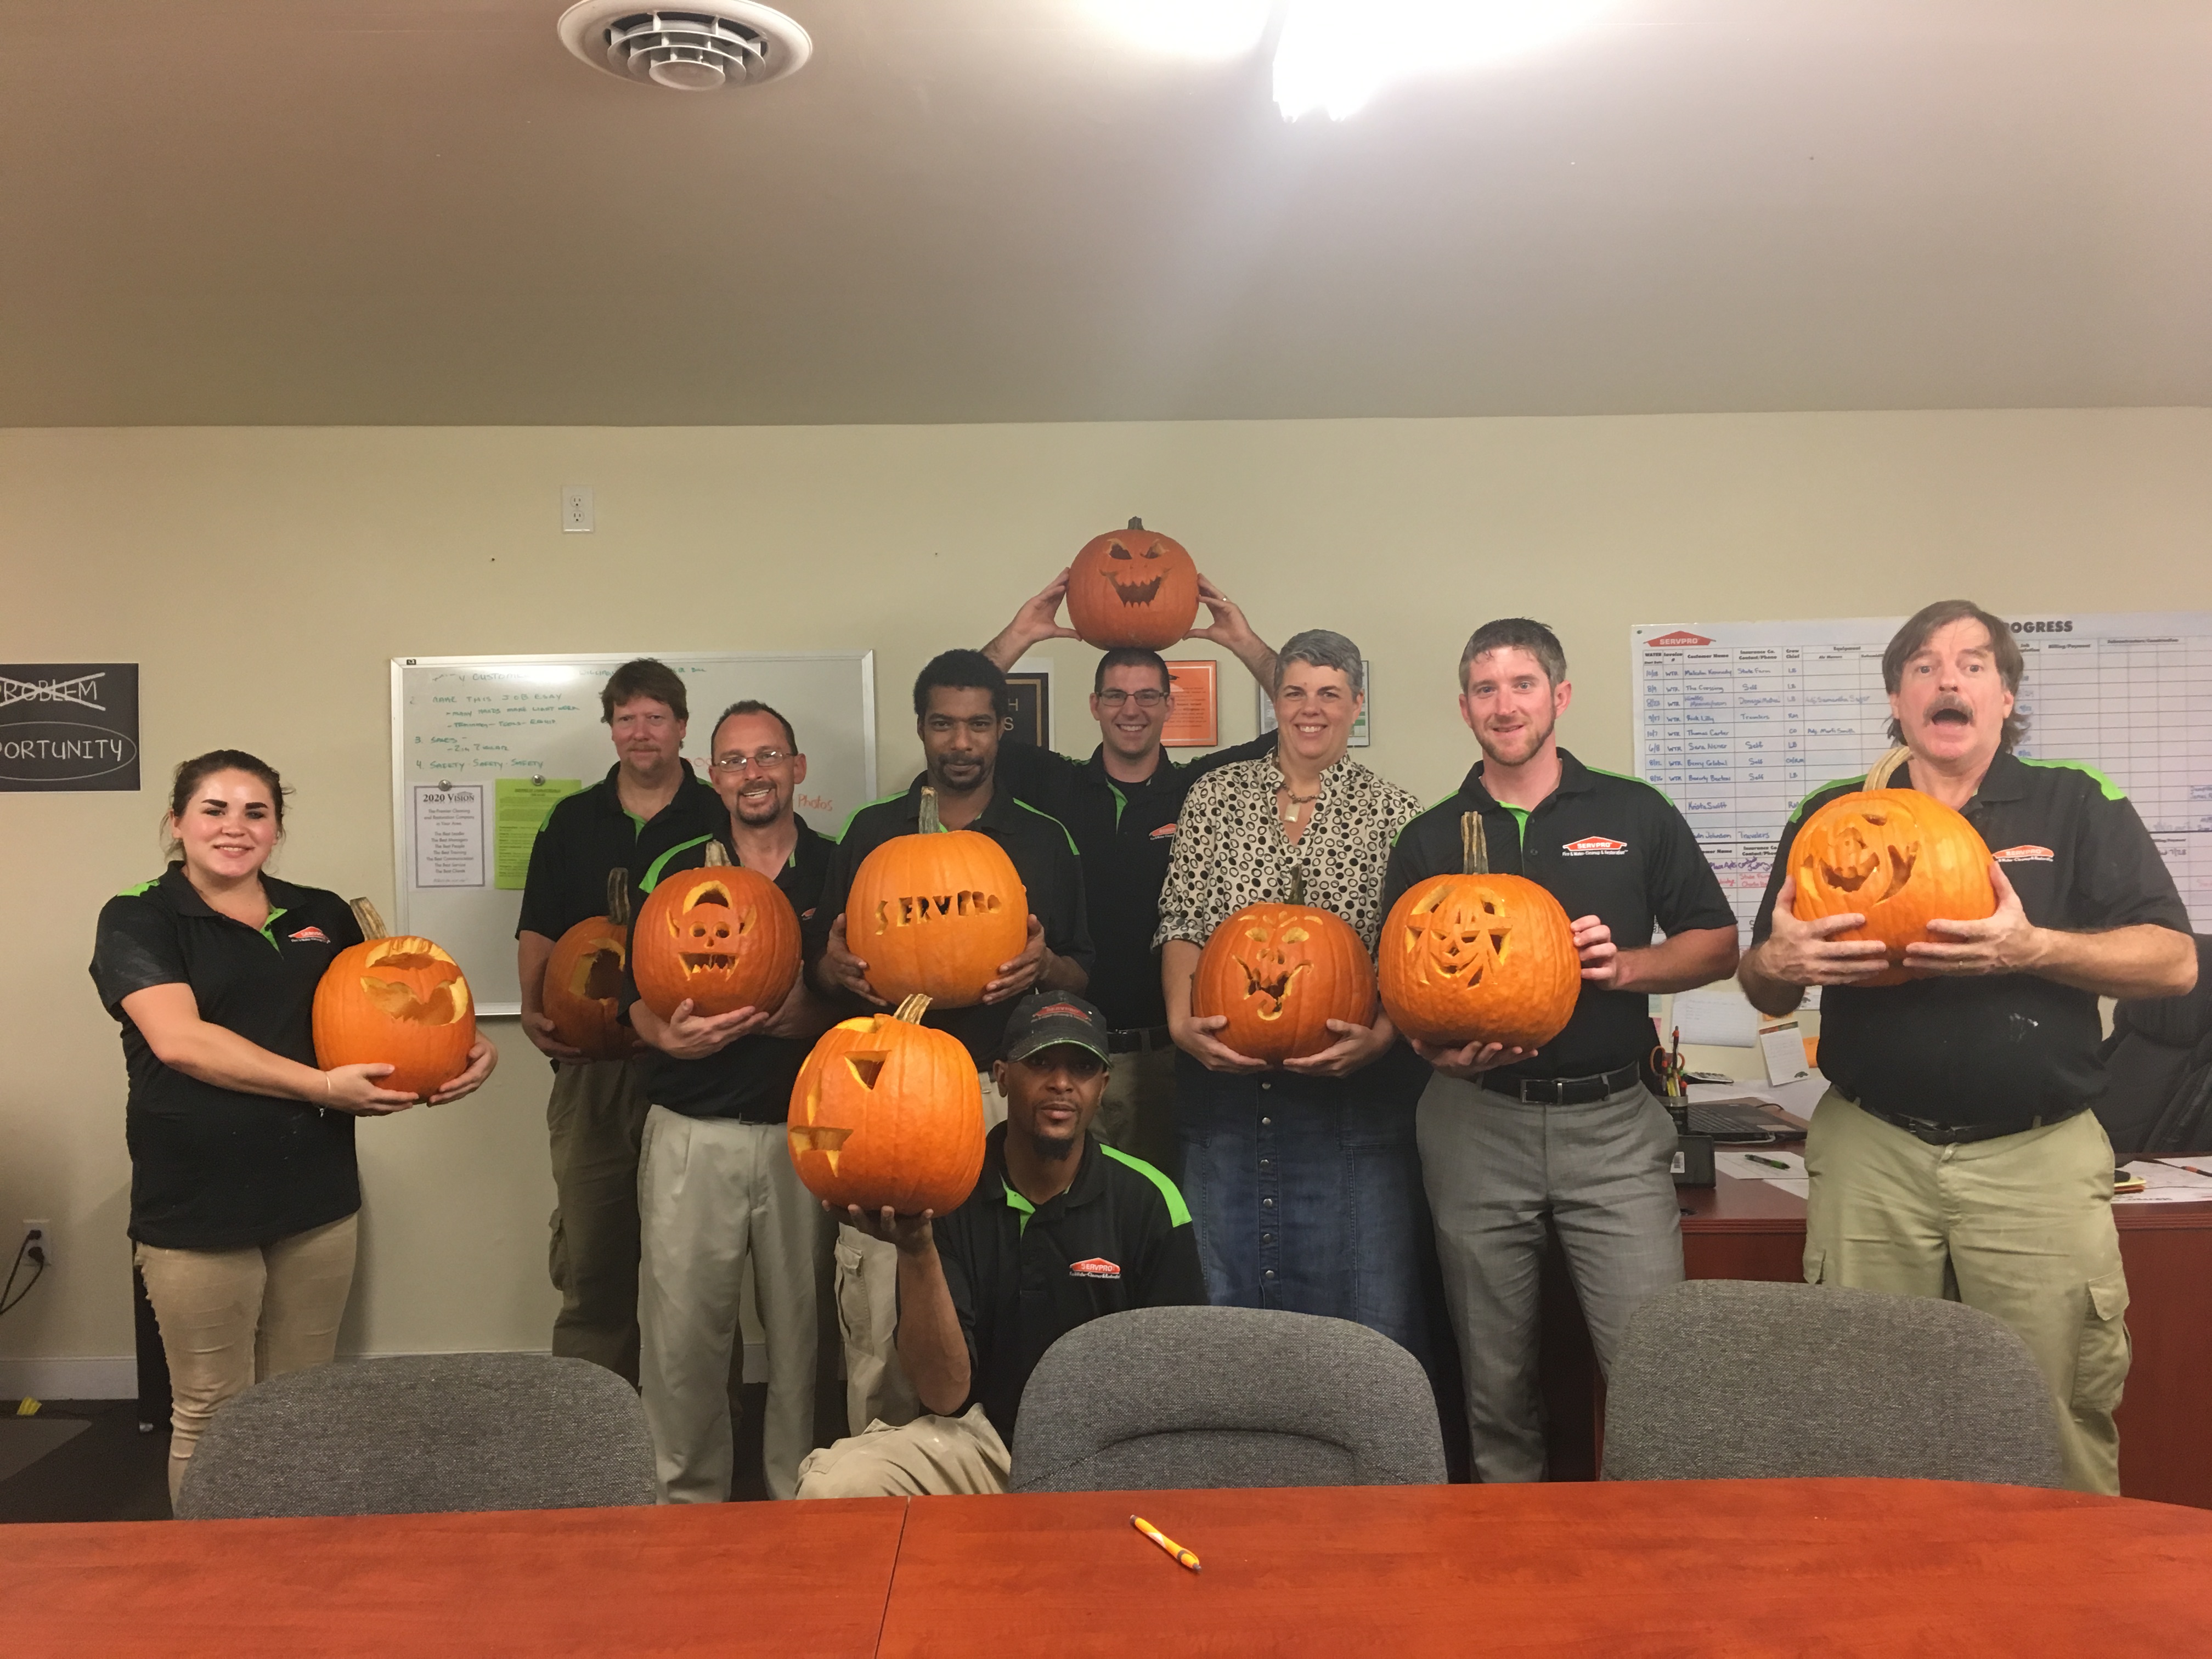 SERVPRO of Charlottesville enjoying the fall season with a pumpkin carving contest.